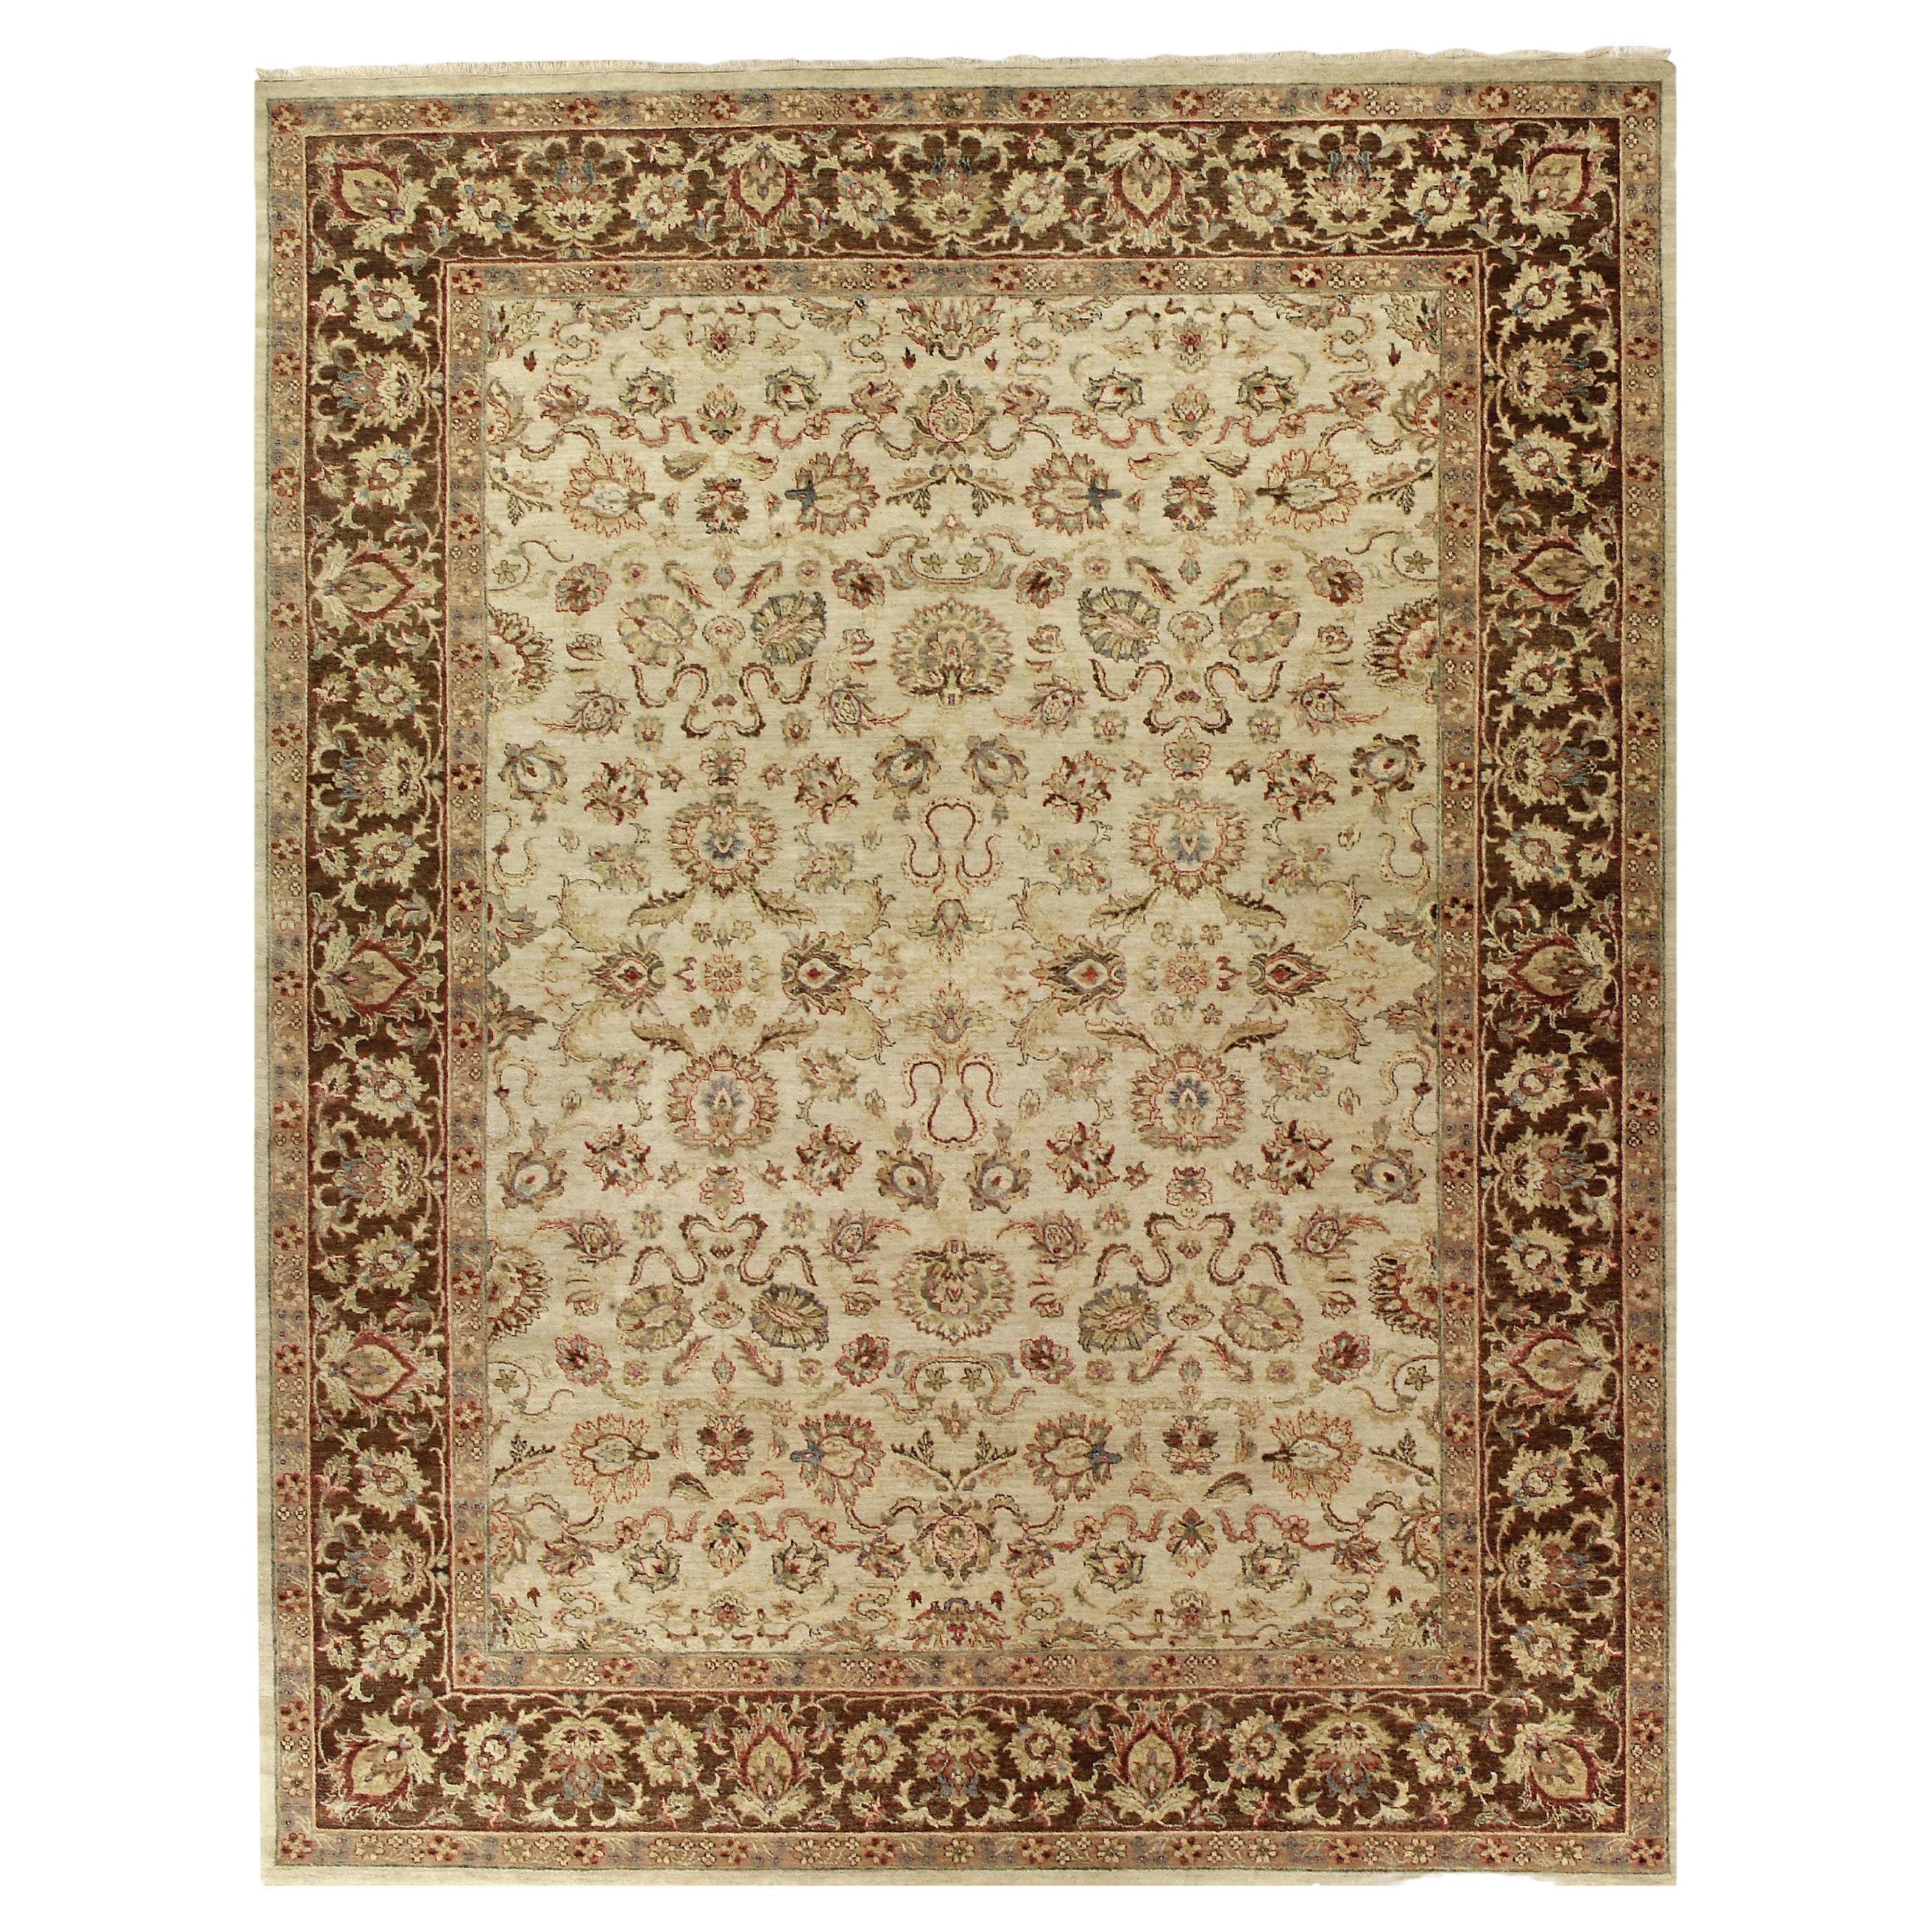 Luxury Traditional Hand-Knotted Cream/Mocha 12X24 Rug